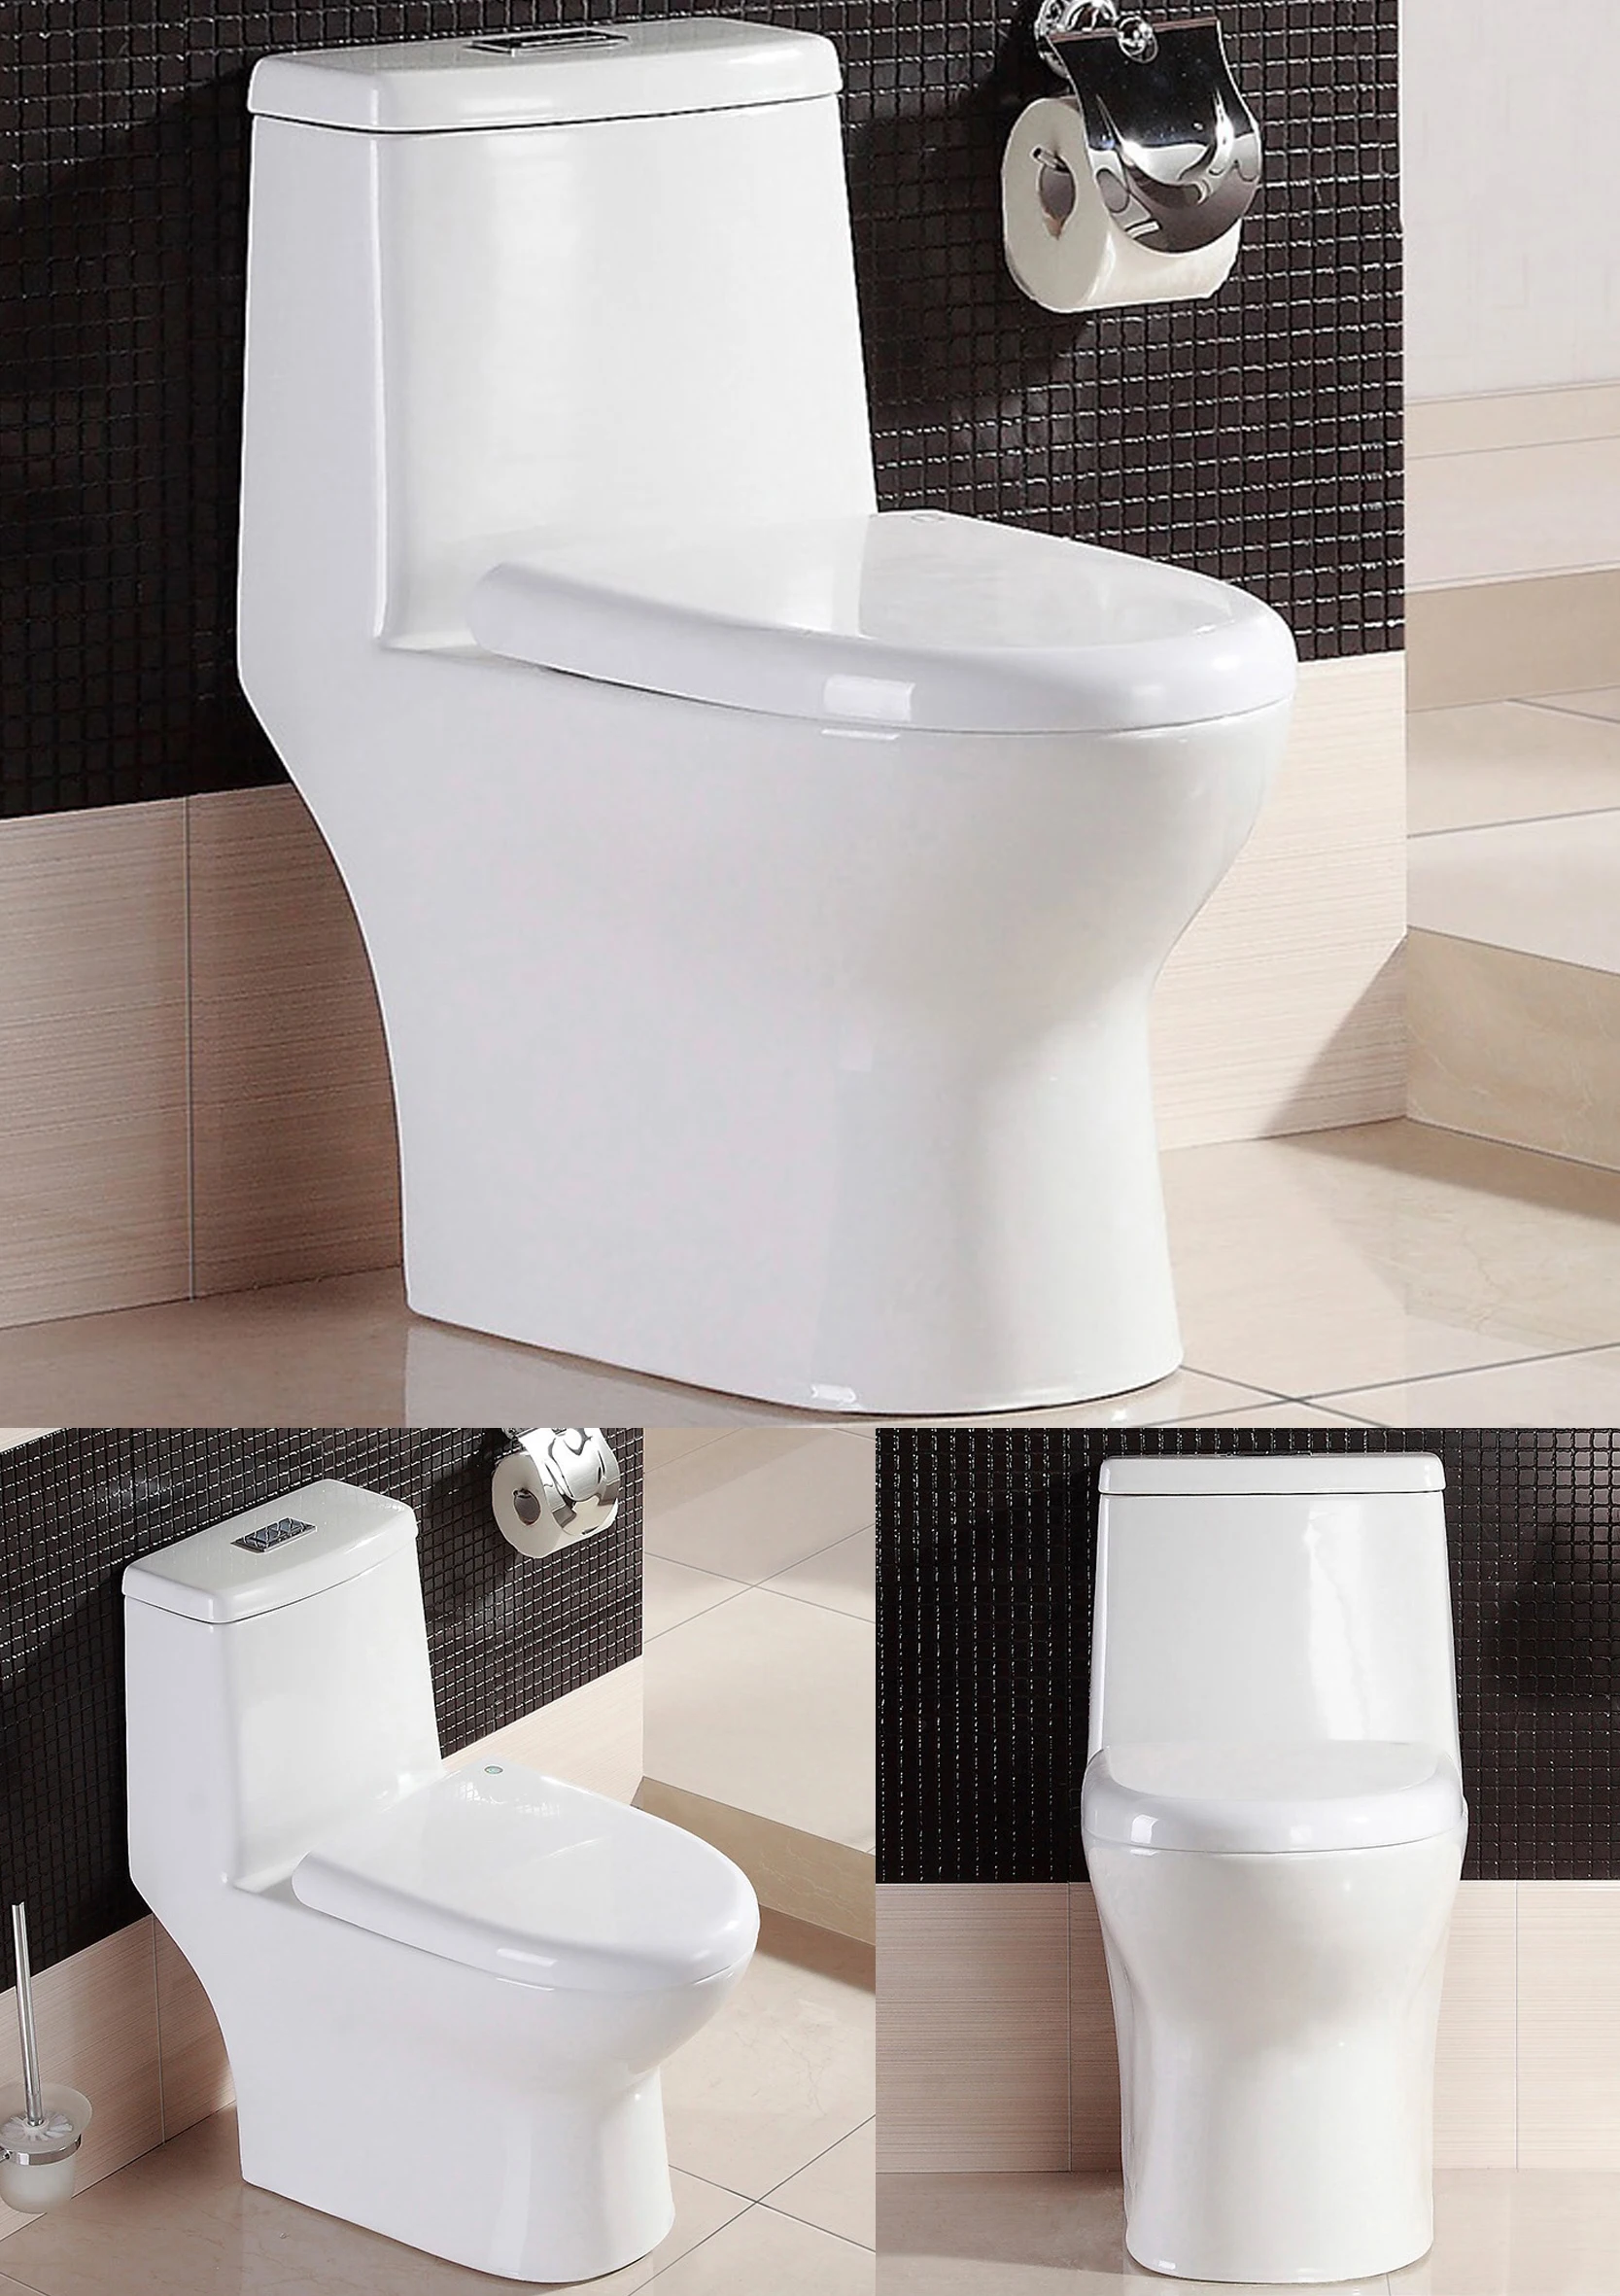 JOININ chaozhou supplier bathroom Tornado one piece toilet with high quality JY1315